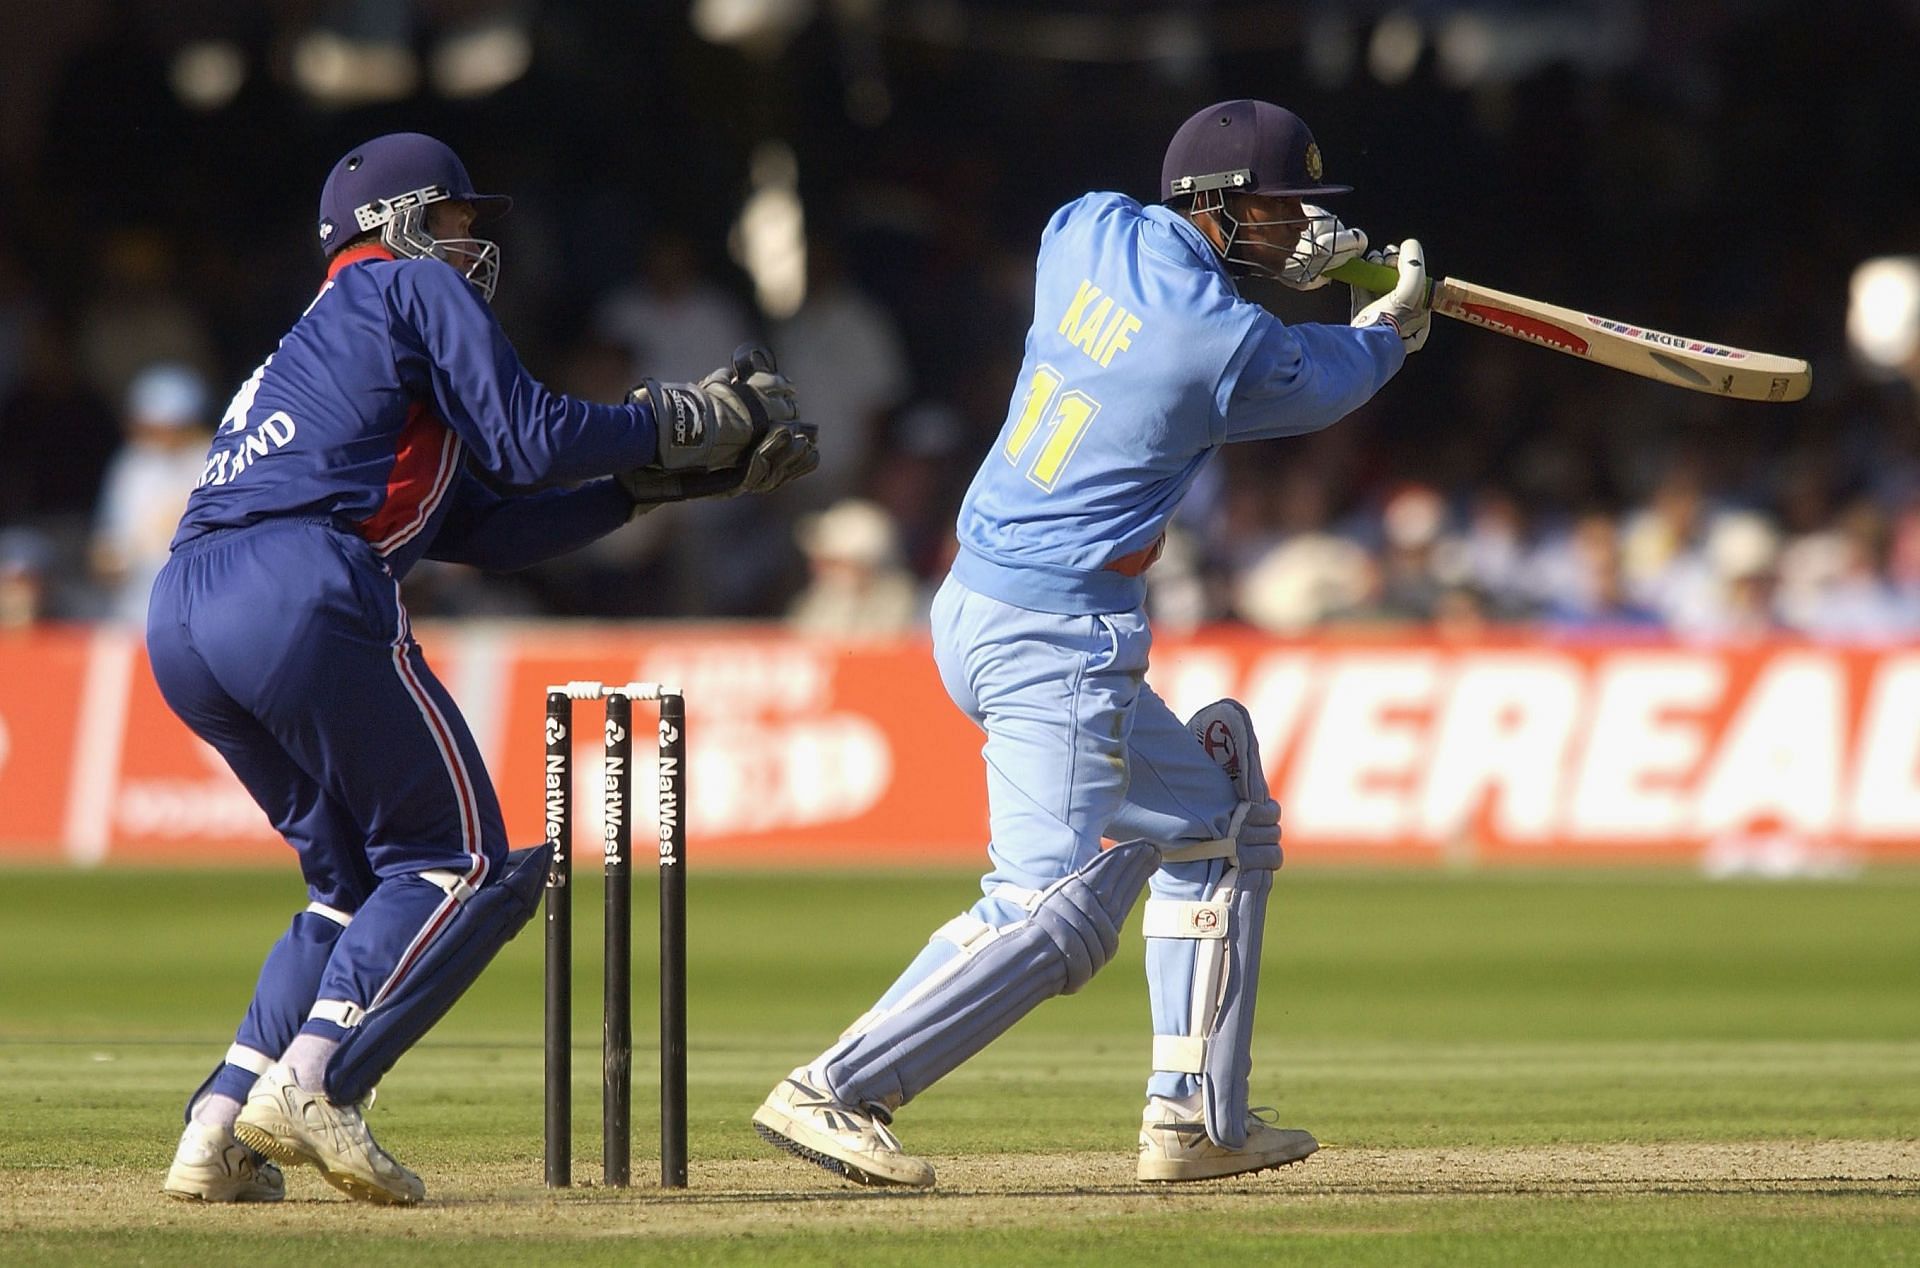 Mohammad Kaif struck six fours and two sixes during his innings.